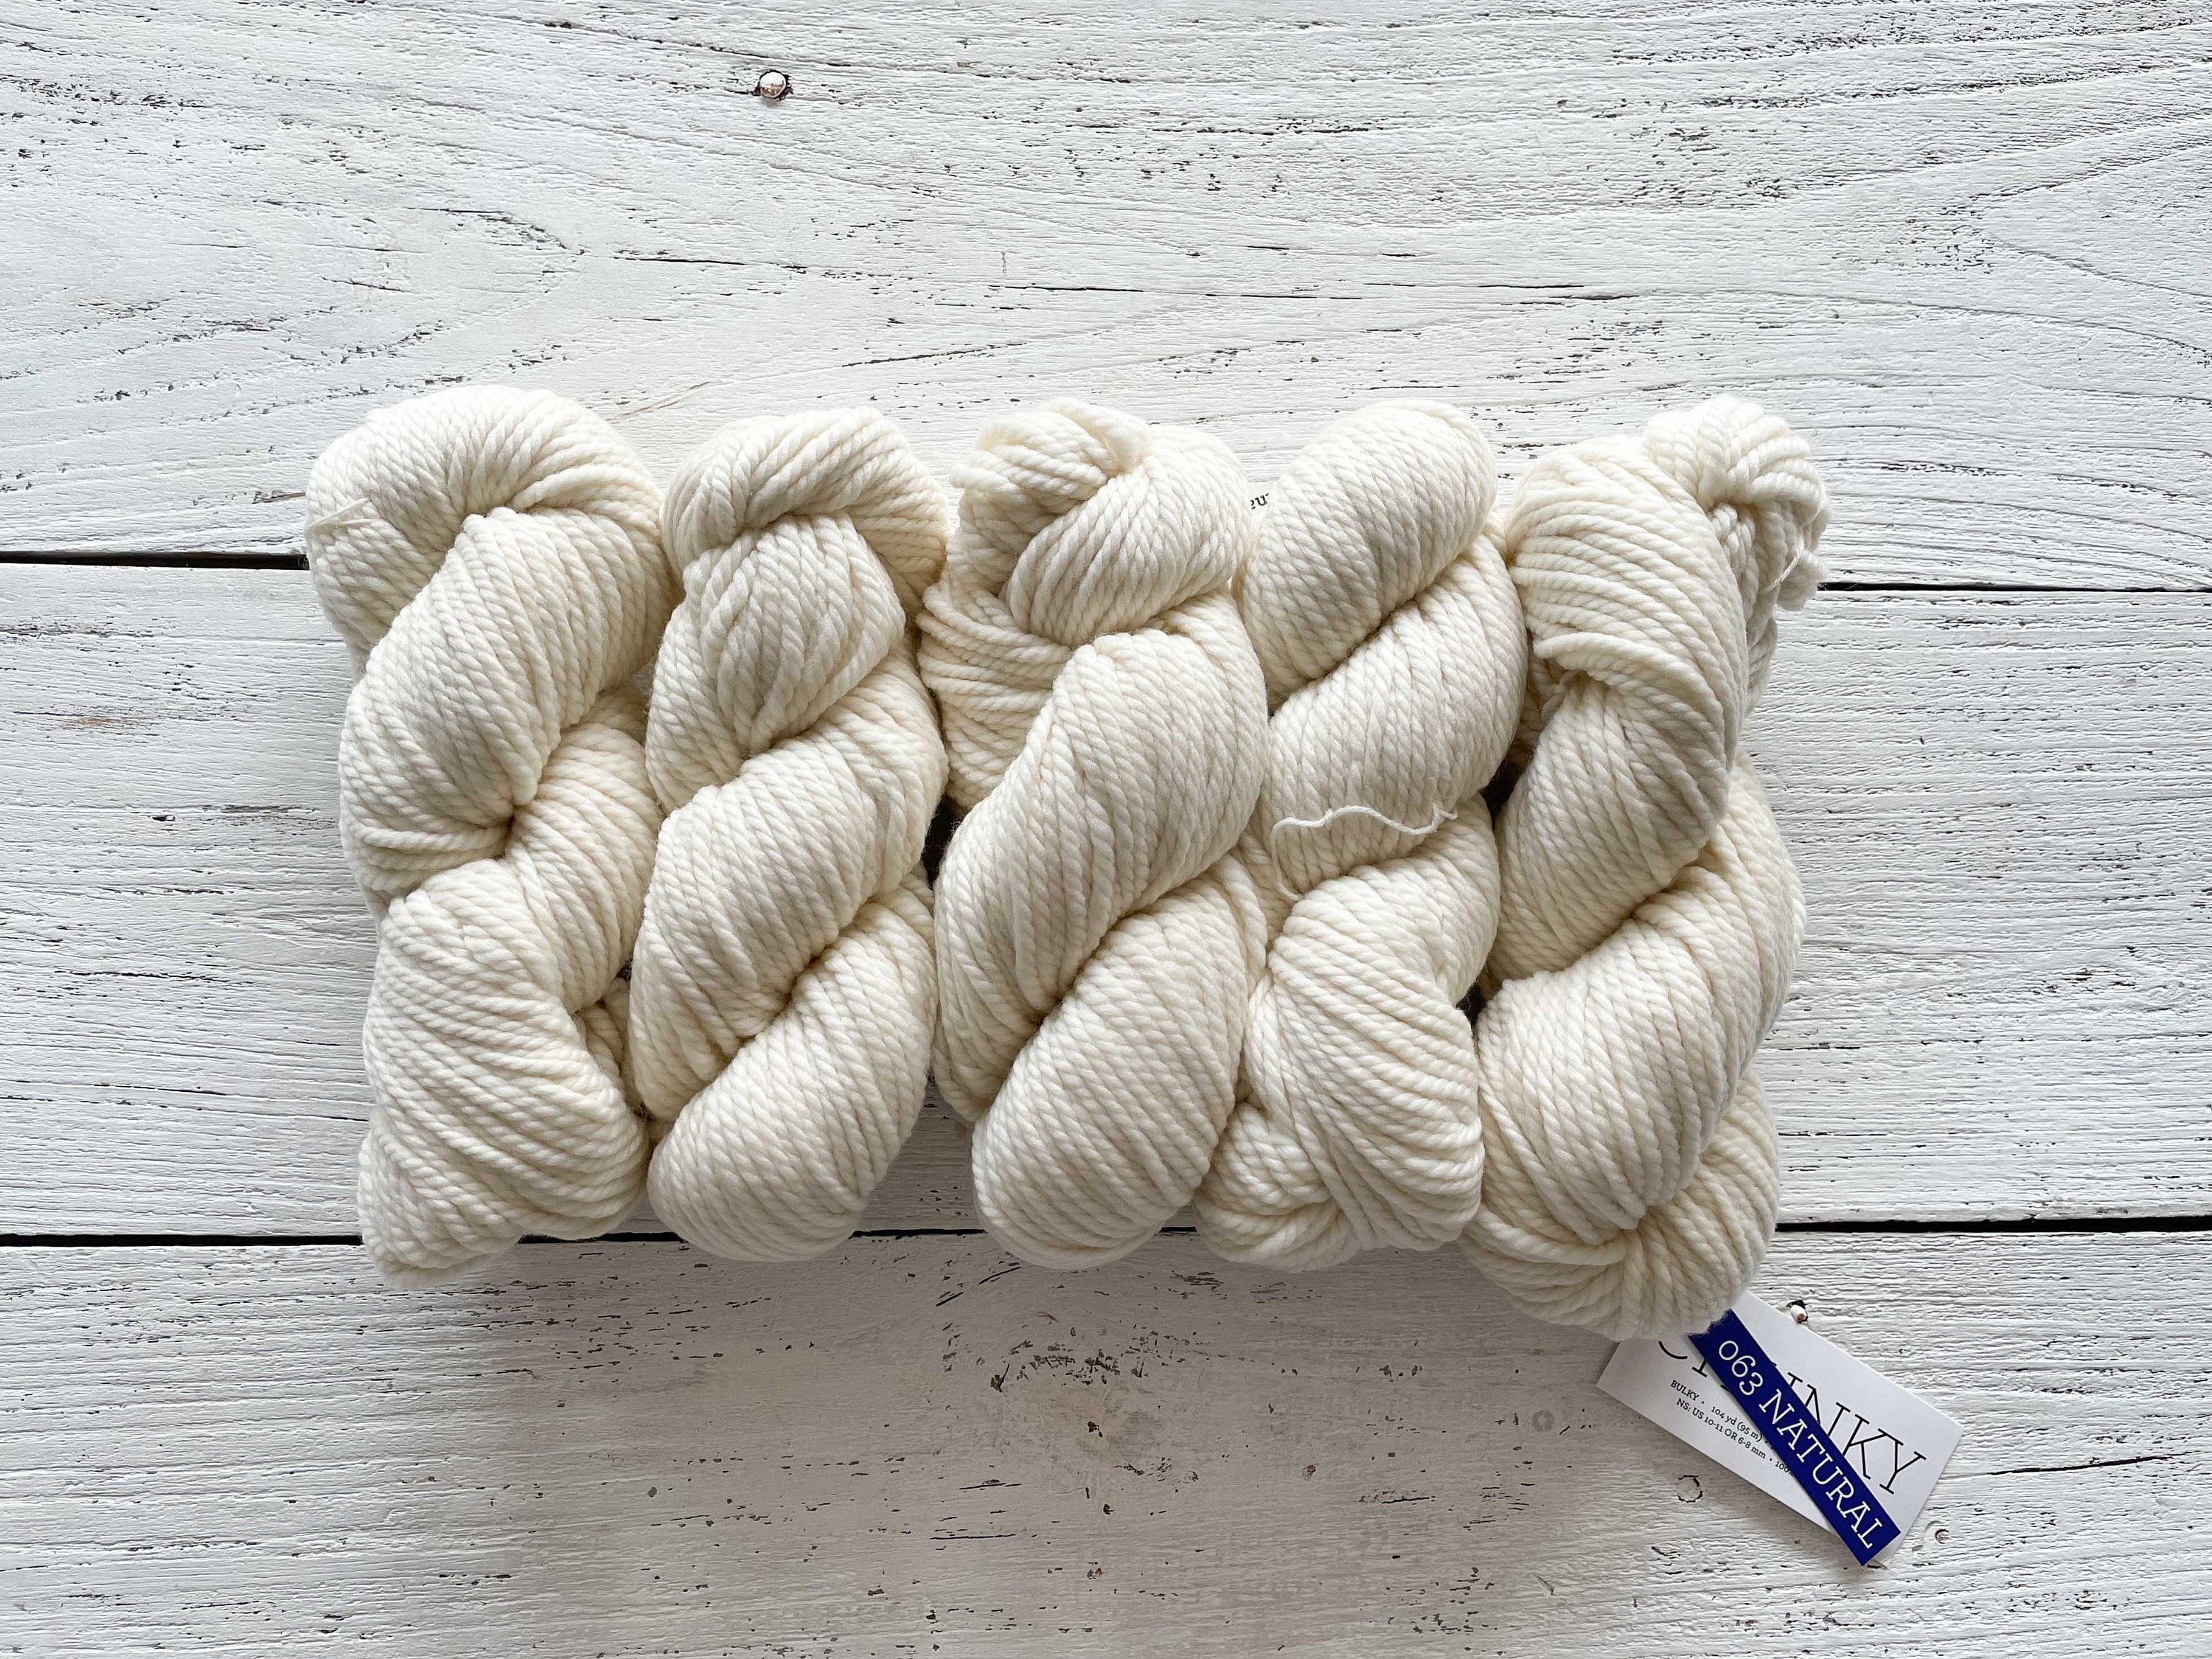 Ombré-Encore Thick Bulky #5 Weight Knit & Crochet Hygge Yarn for Chunky Blankets, Hats, Scarves and Shawls, 100% Acrylic, 3-Pack, 507yds/420g (Milky